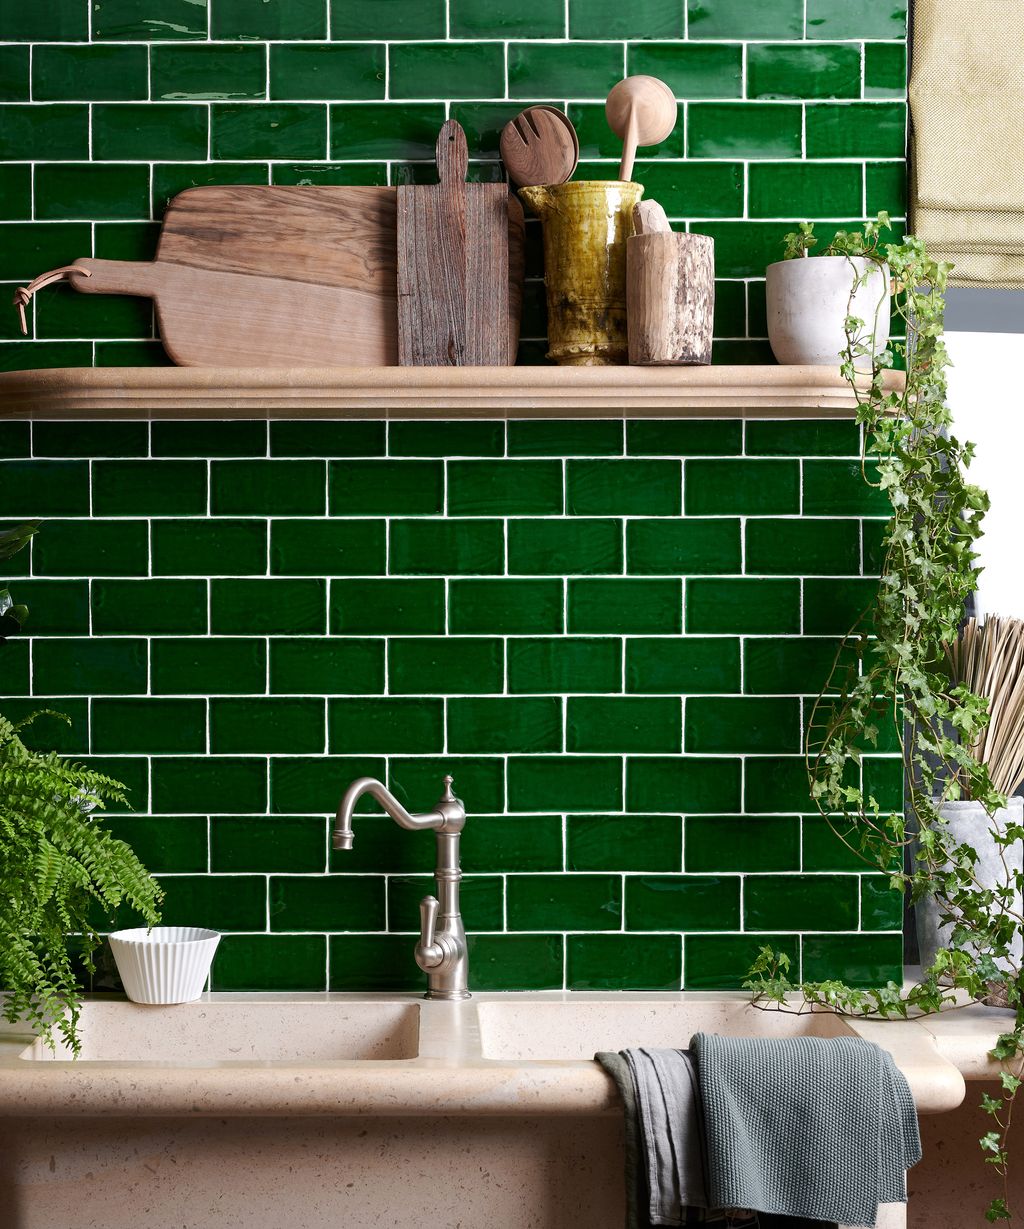 Kitchen wall tile ideas: bring color, pattern and style to vertical ...